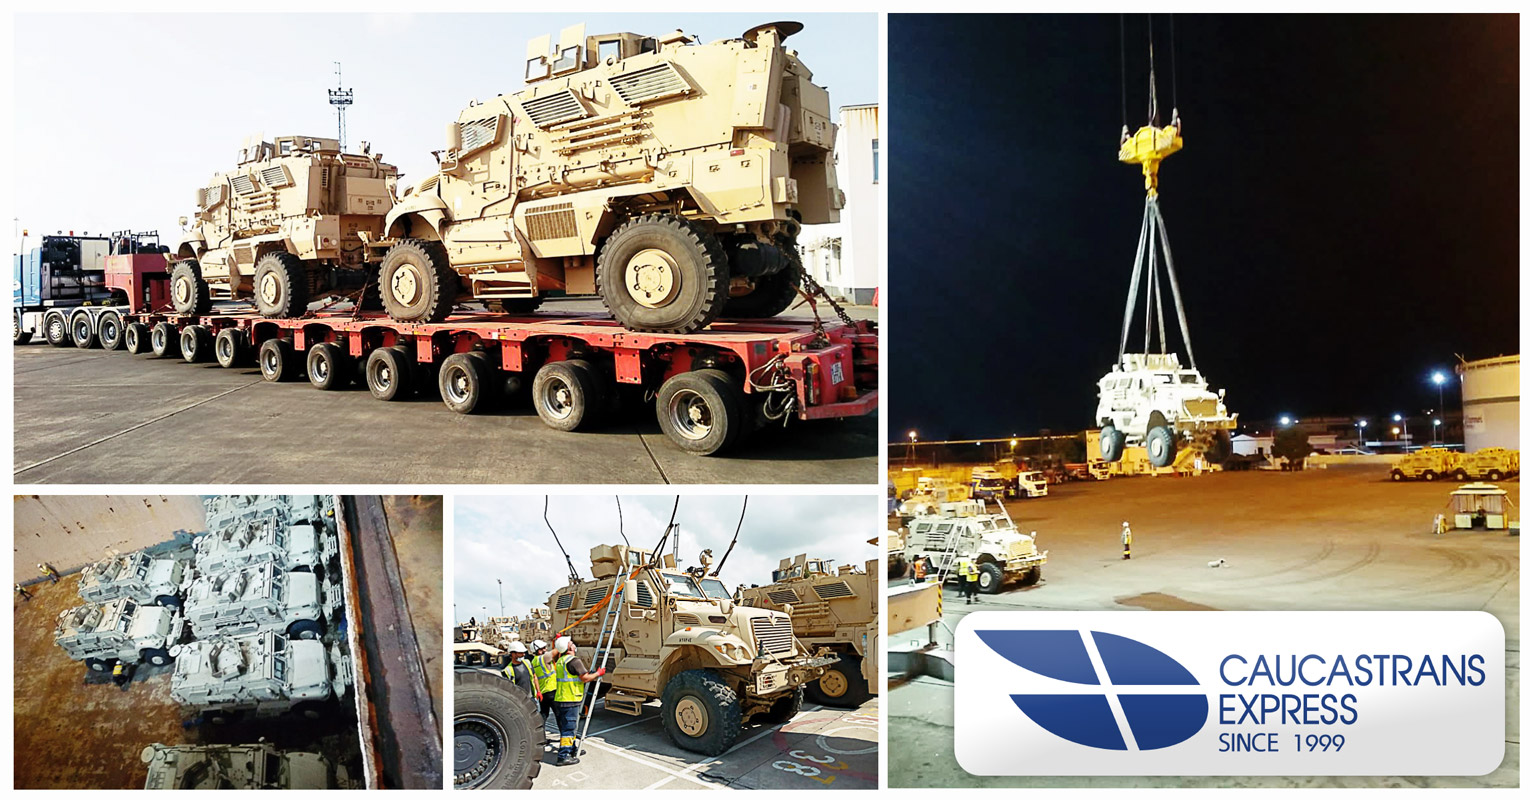 Caucastransexpress Performed a Successful Heavy Vehicle Project